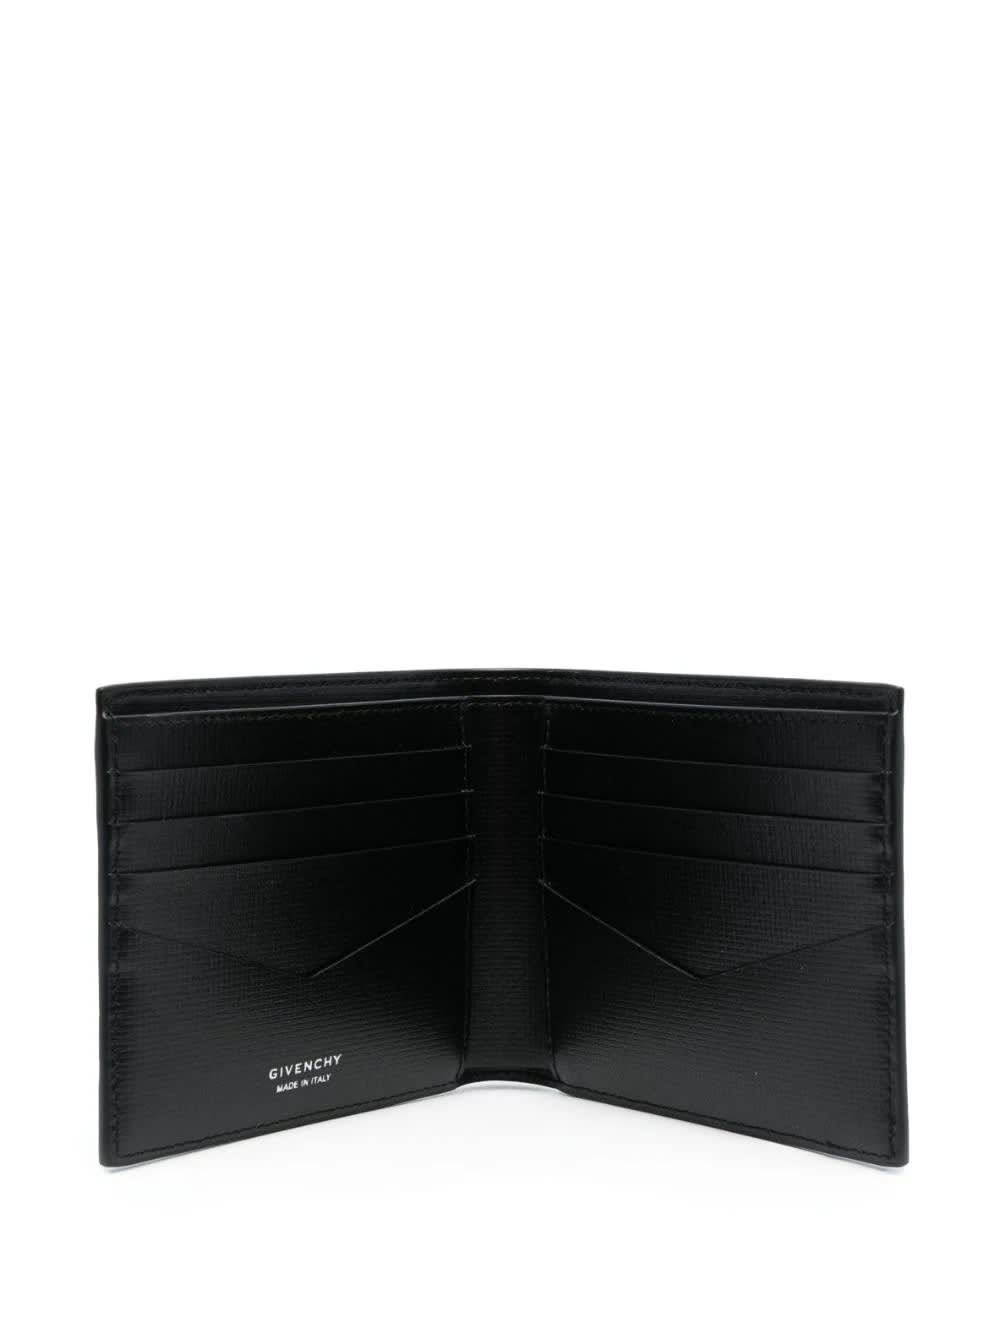 Shop Givenchy Wallet In Black Classique 4g Leather